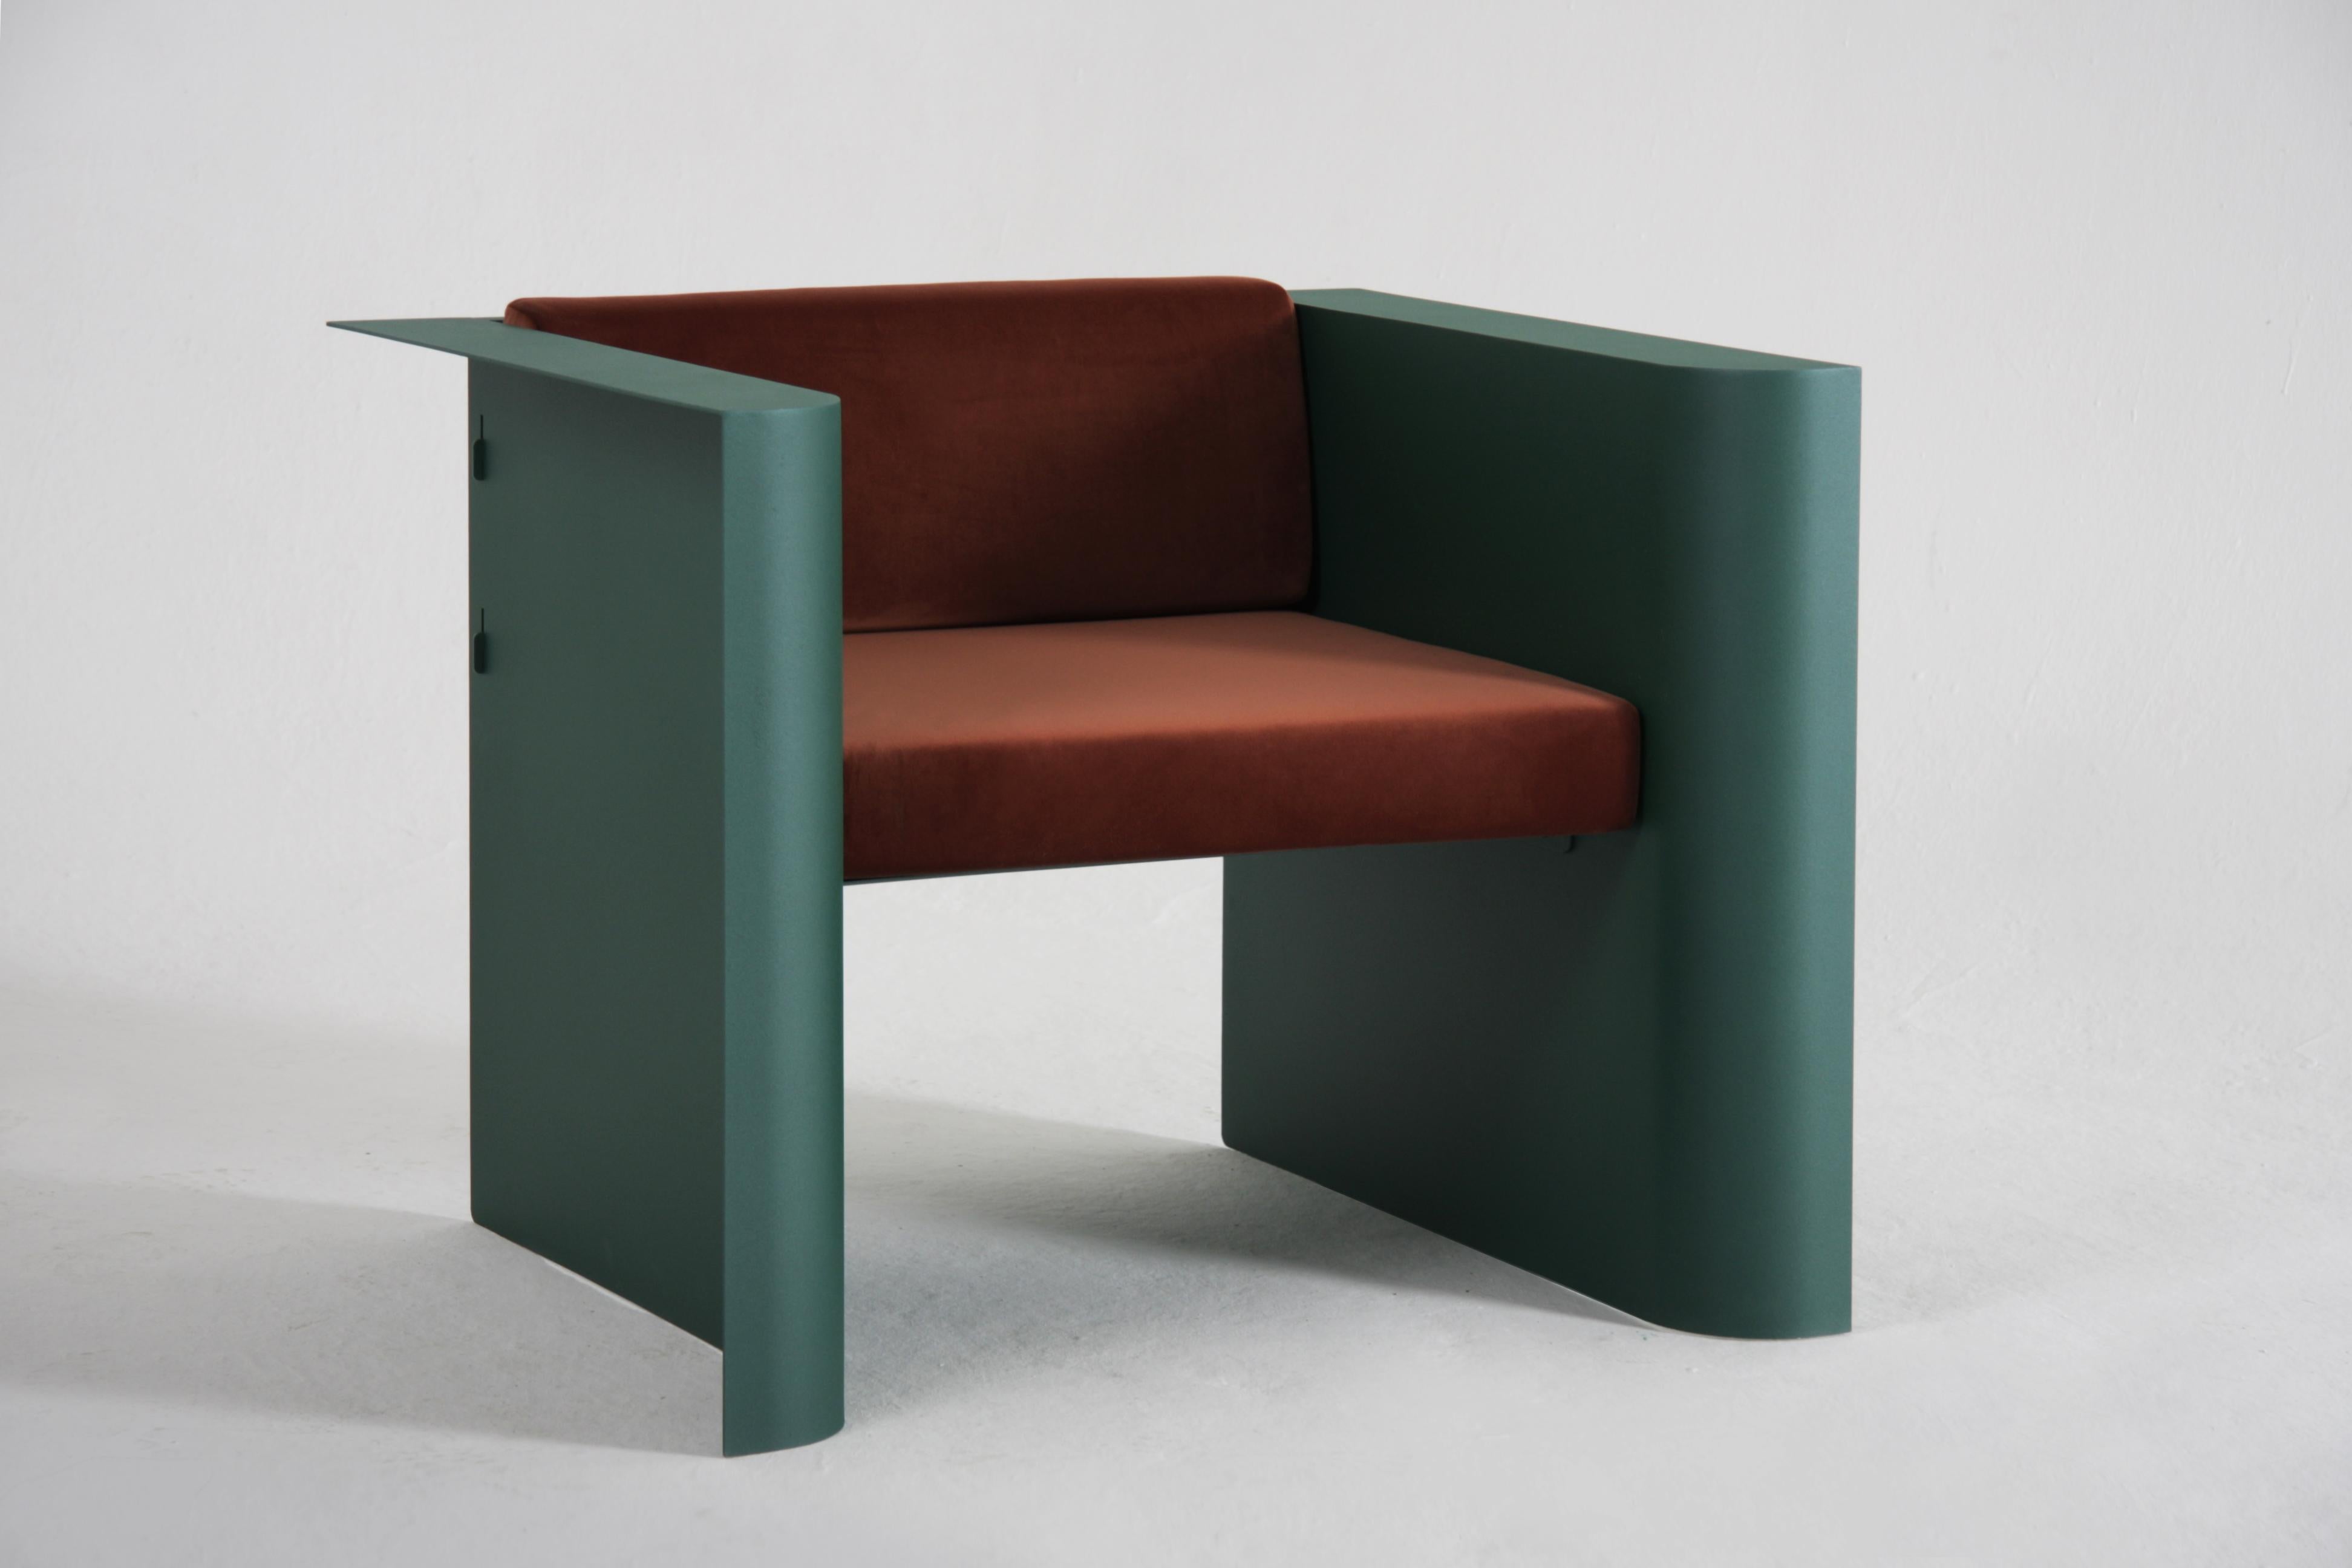 This elegant and minimalistic armchair was designed as an addition for 